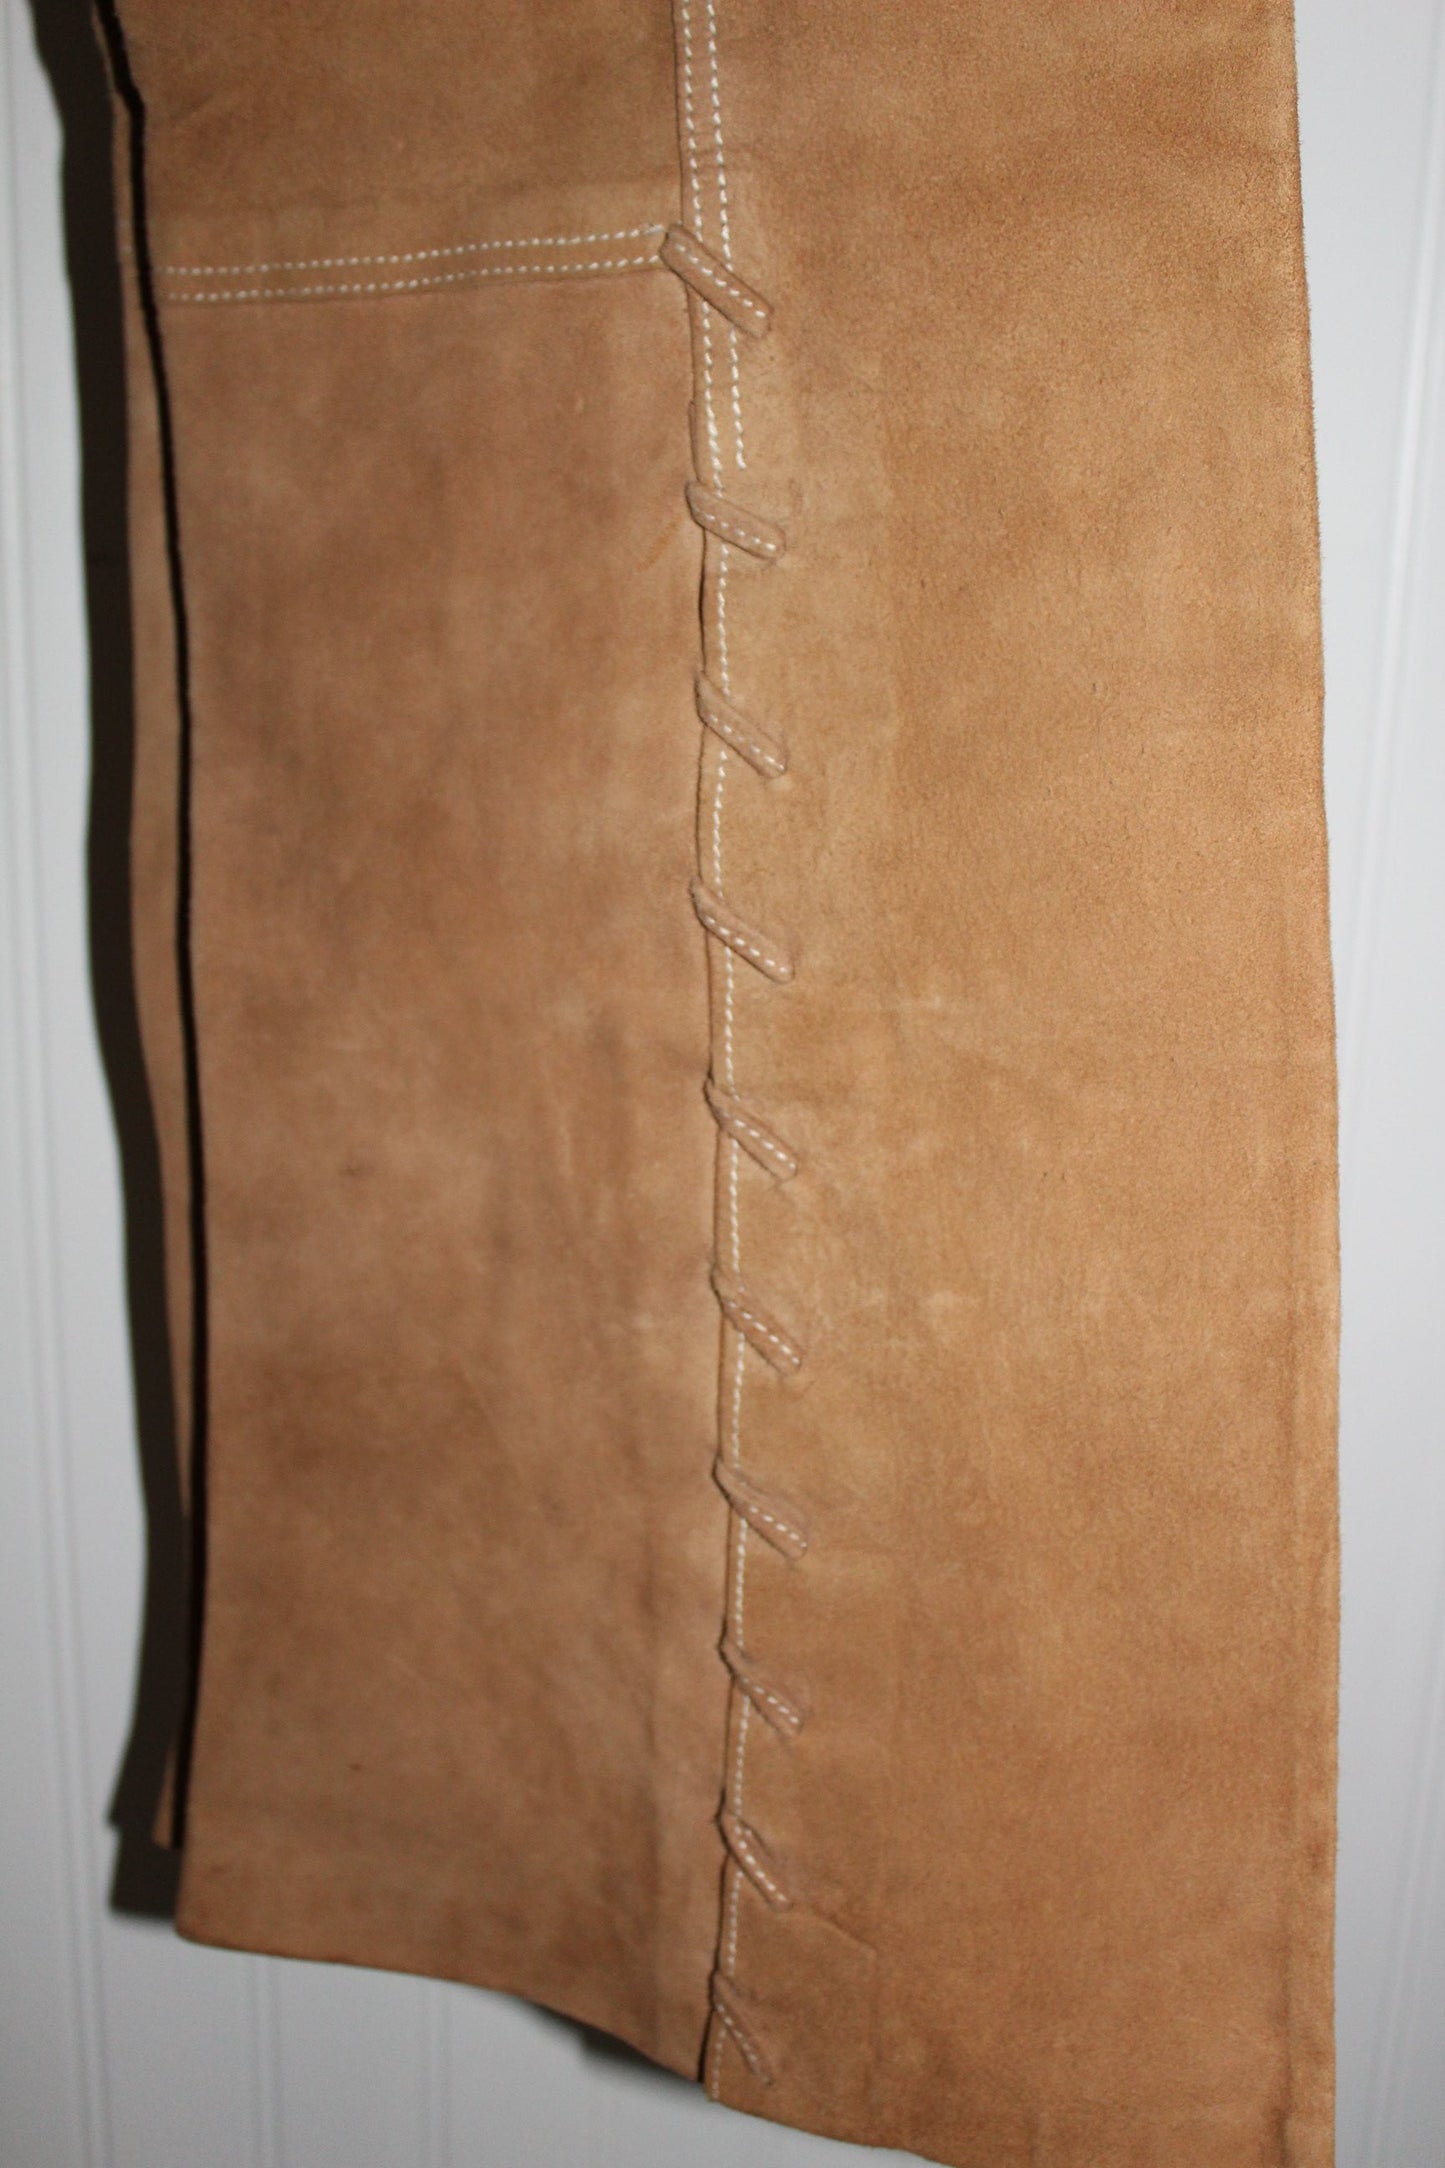 Vintage Leather Pants Laced Flare Leg Caramel Cream Top Stitch Great Detail comfortable